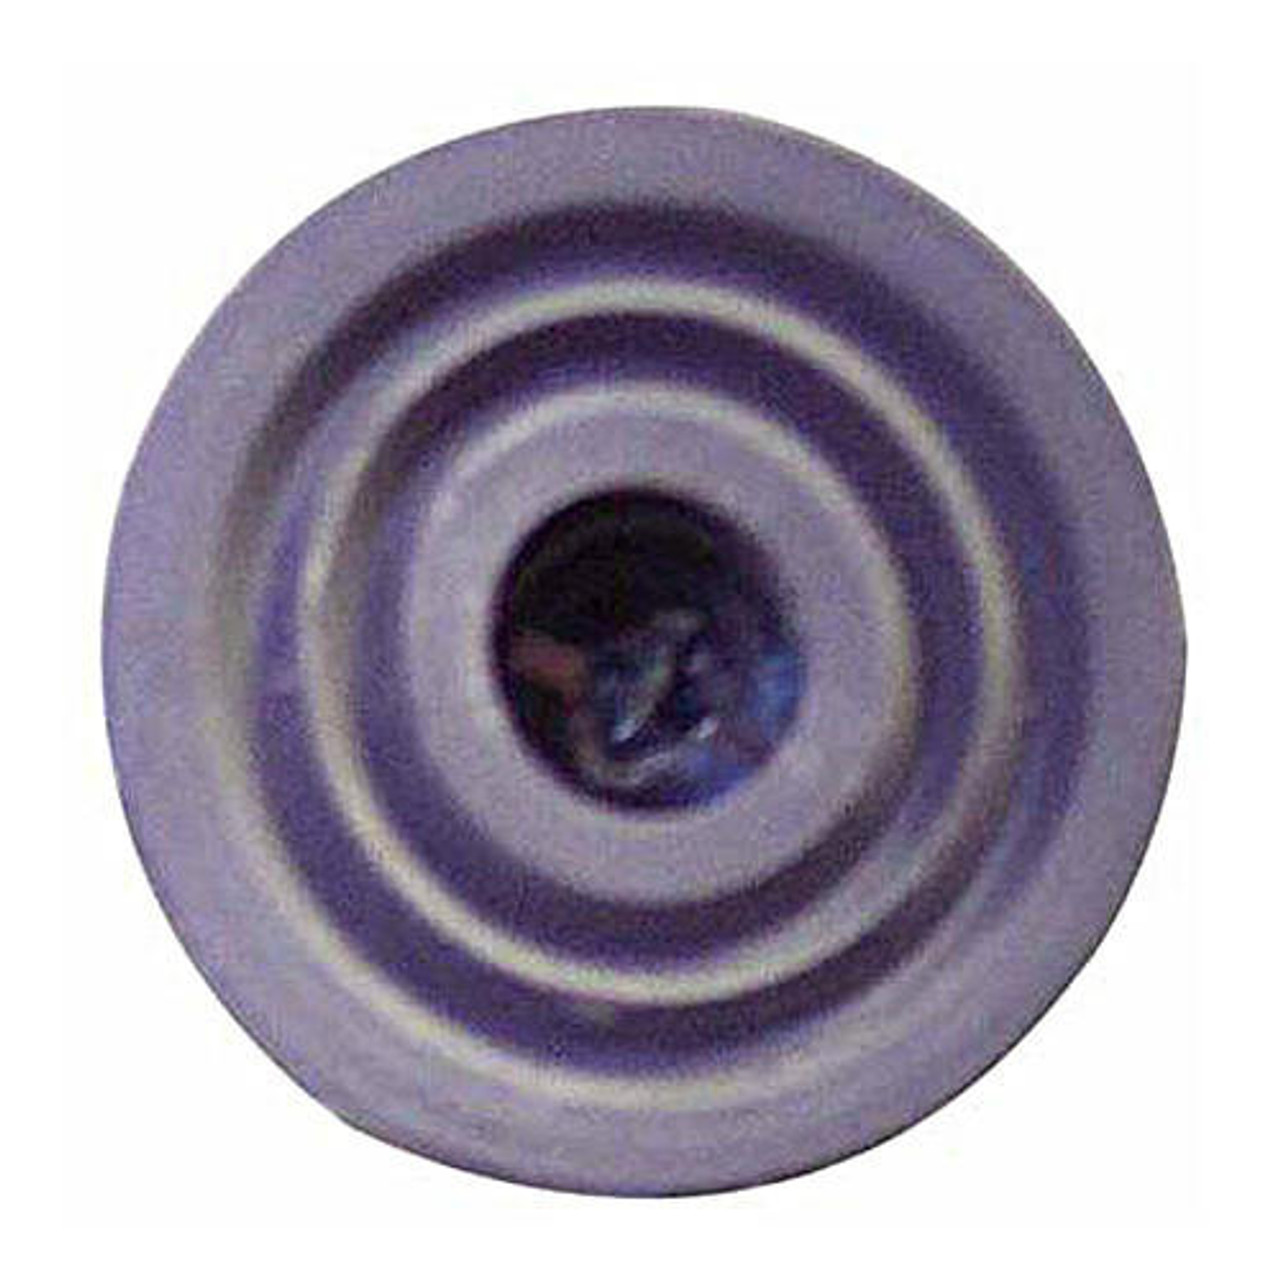 Fast Patch Purple  Repair Kits for Purple Rubber Playground Surfaces